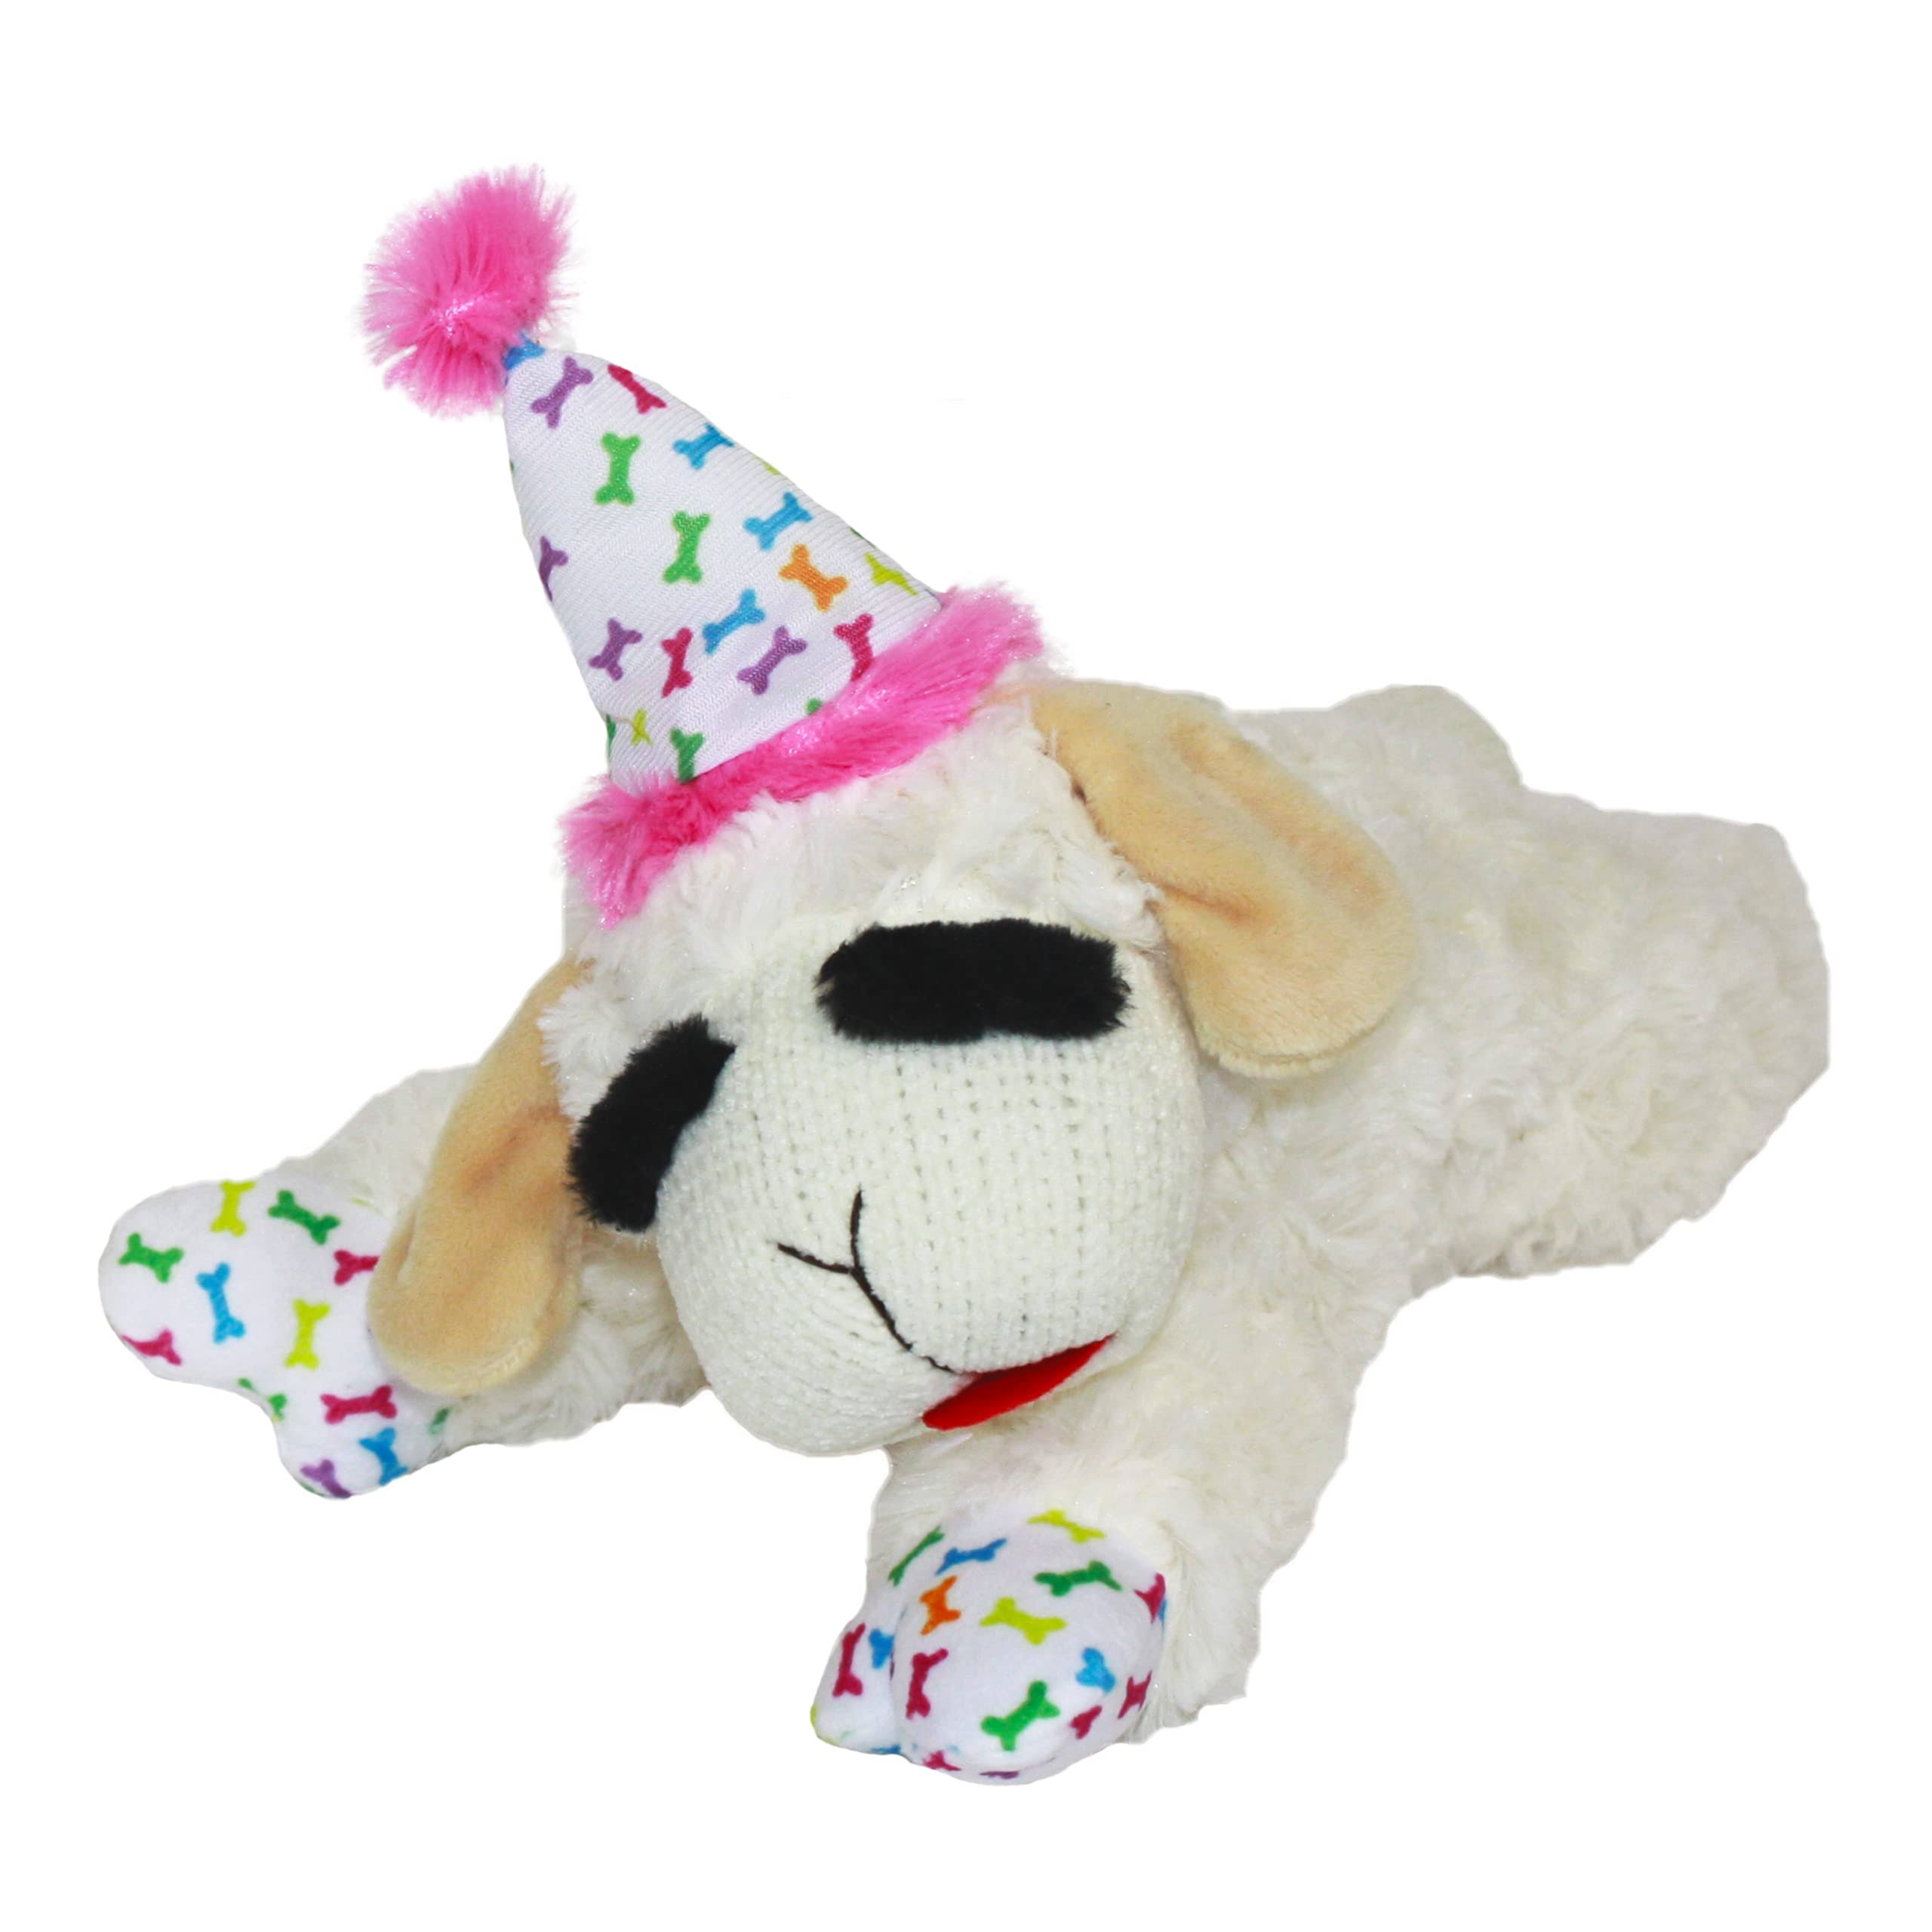 Multipet Lamb Chop Dog Toy with Birthday Hat, Pink, 10.5"